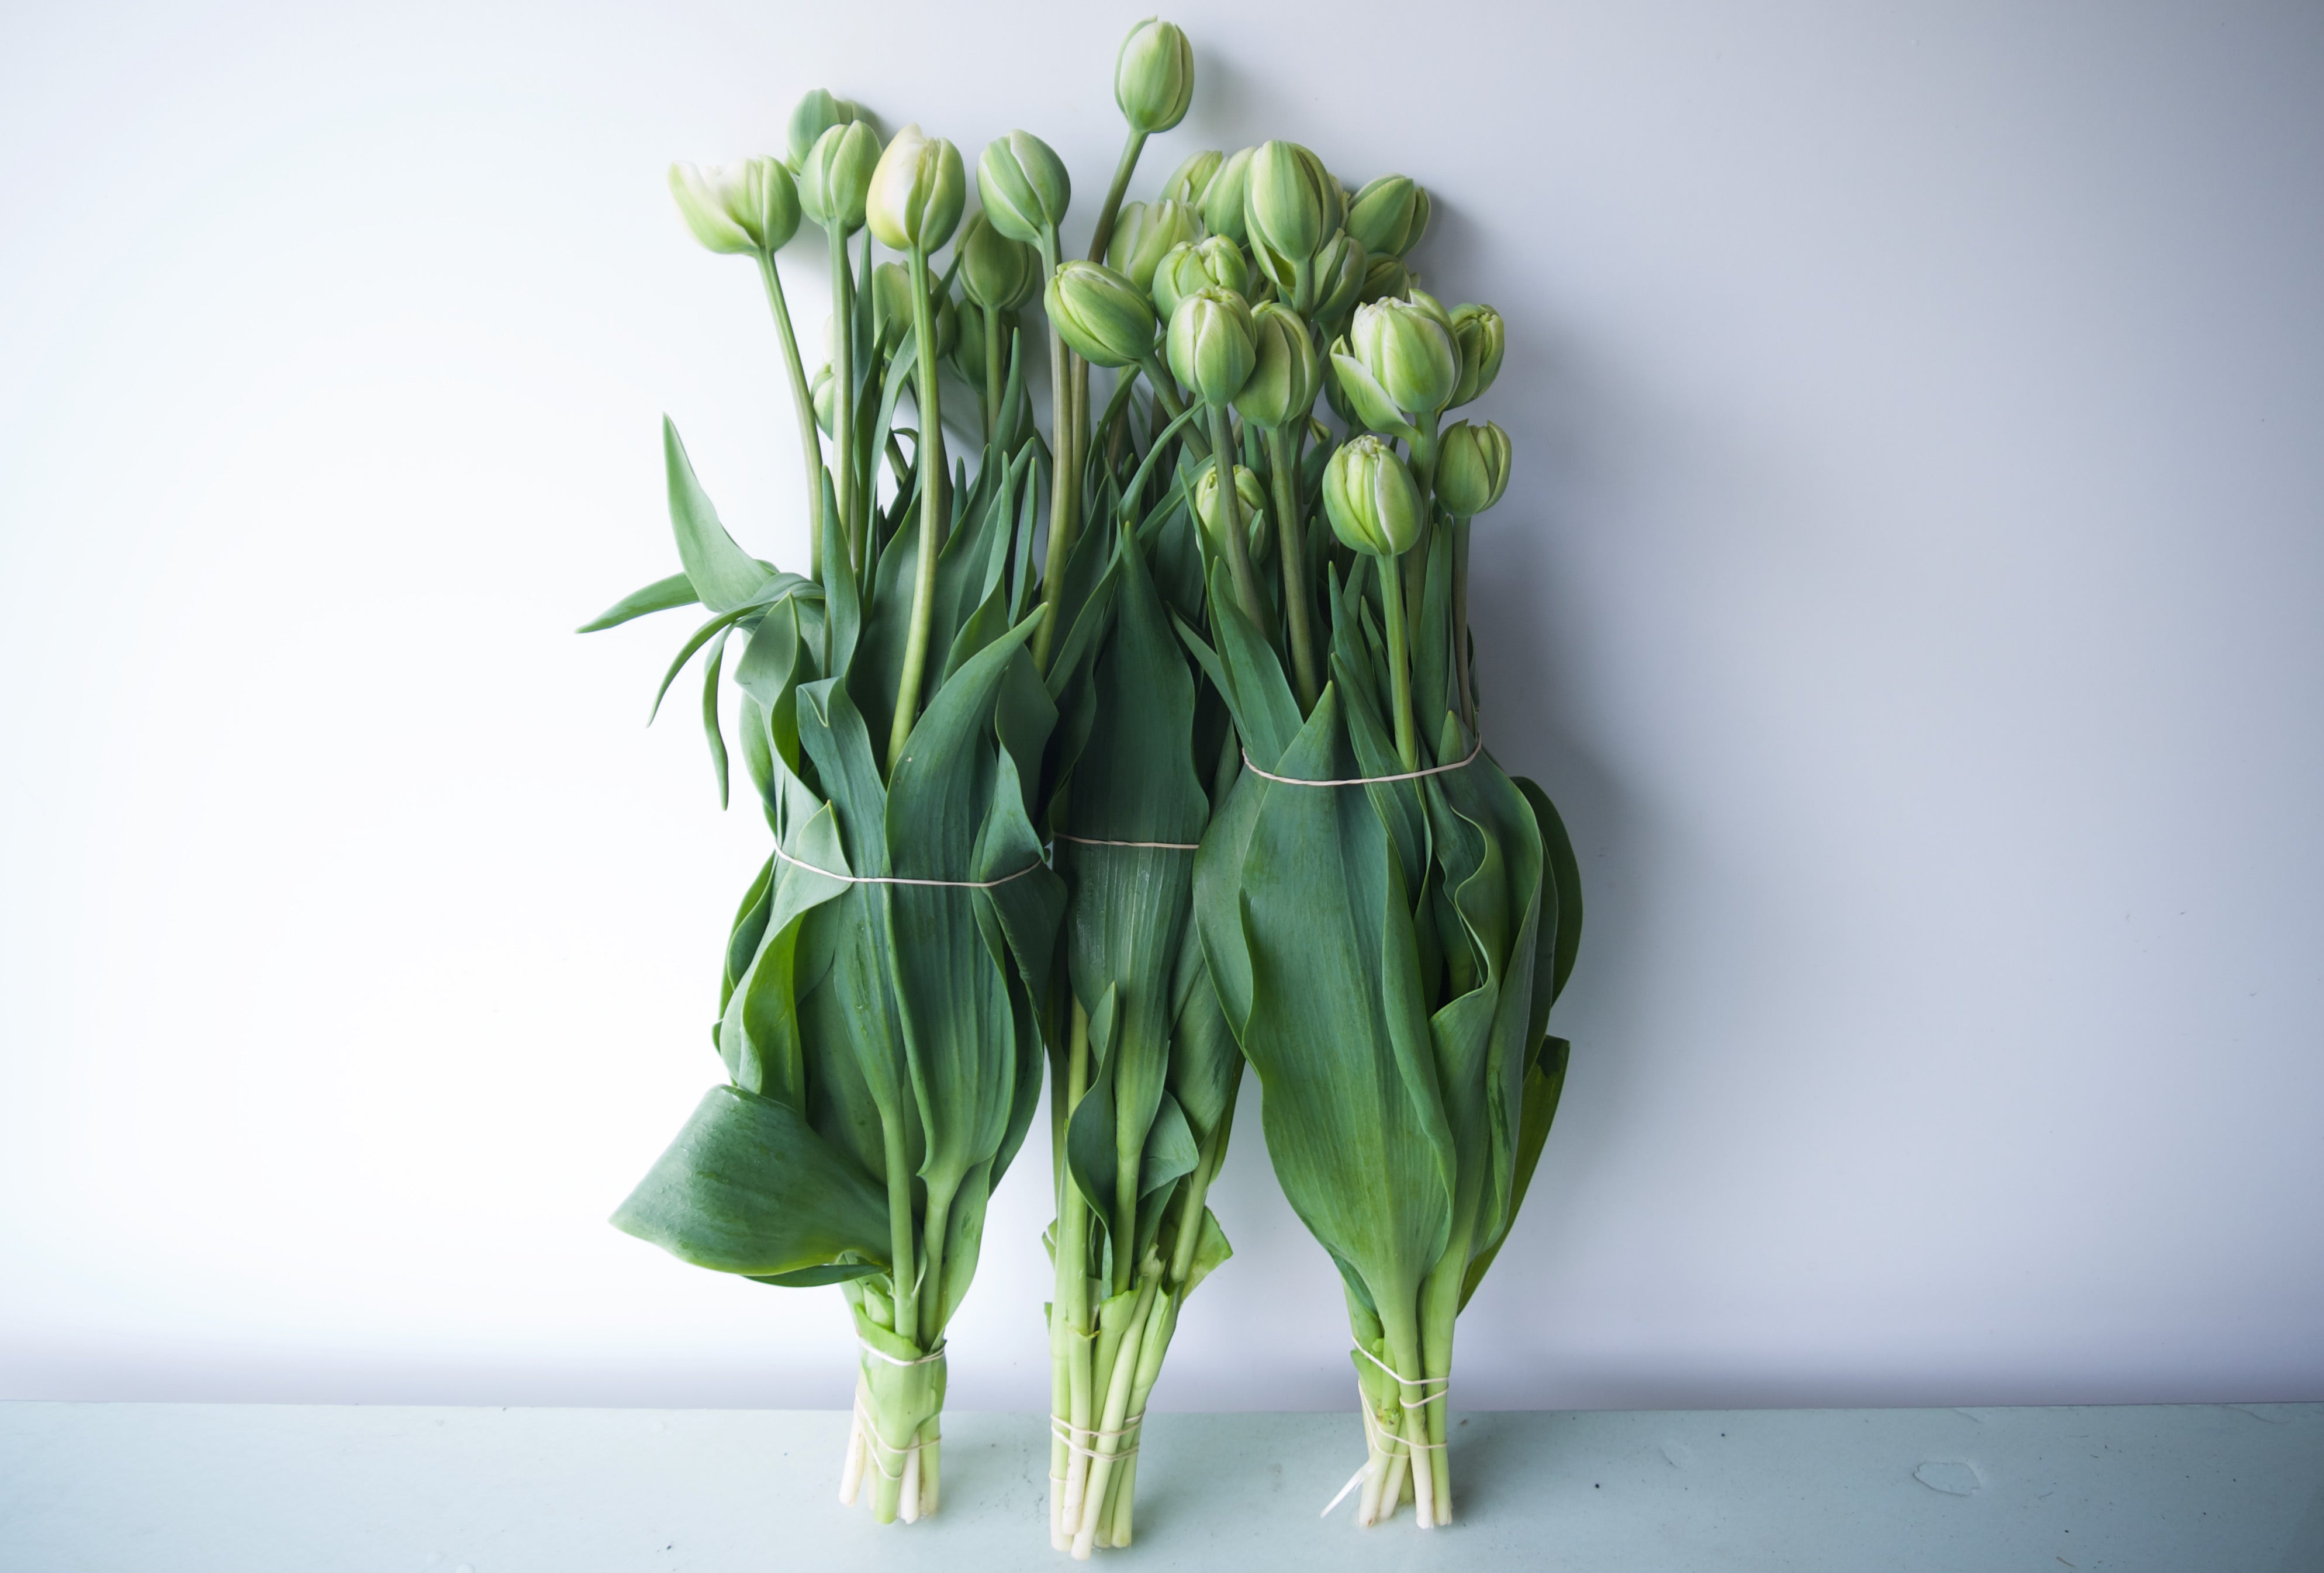 Tulips | Locally Grown Flowers | Vancouver Portland Florists Delivery | Fieldwork Flowers